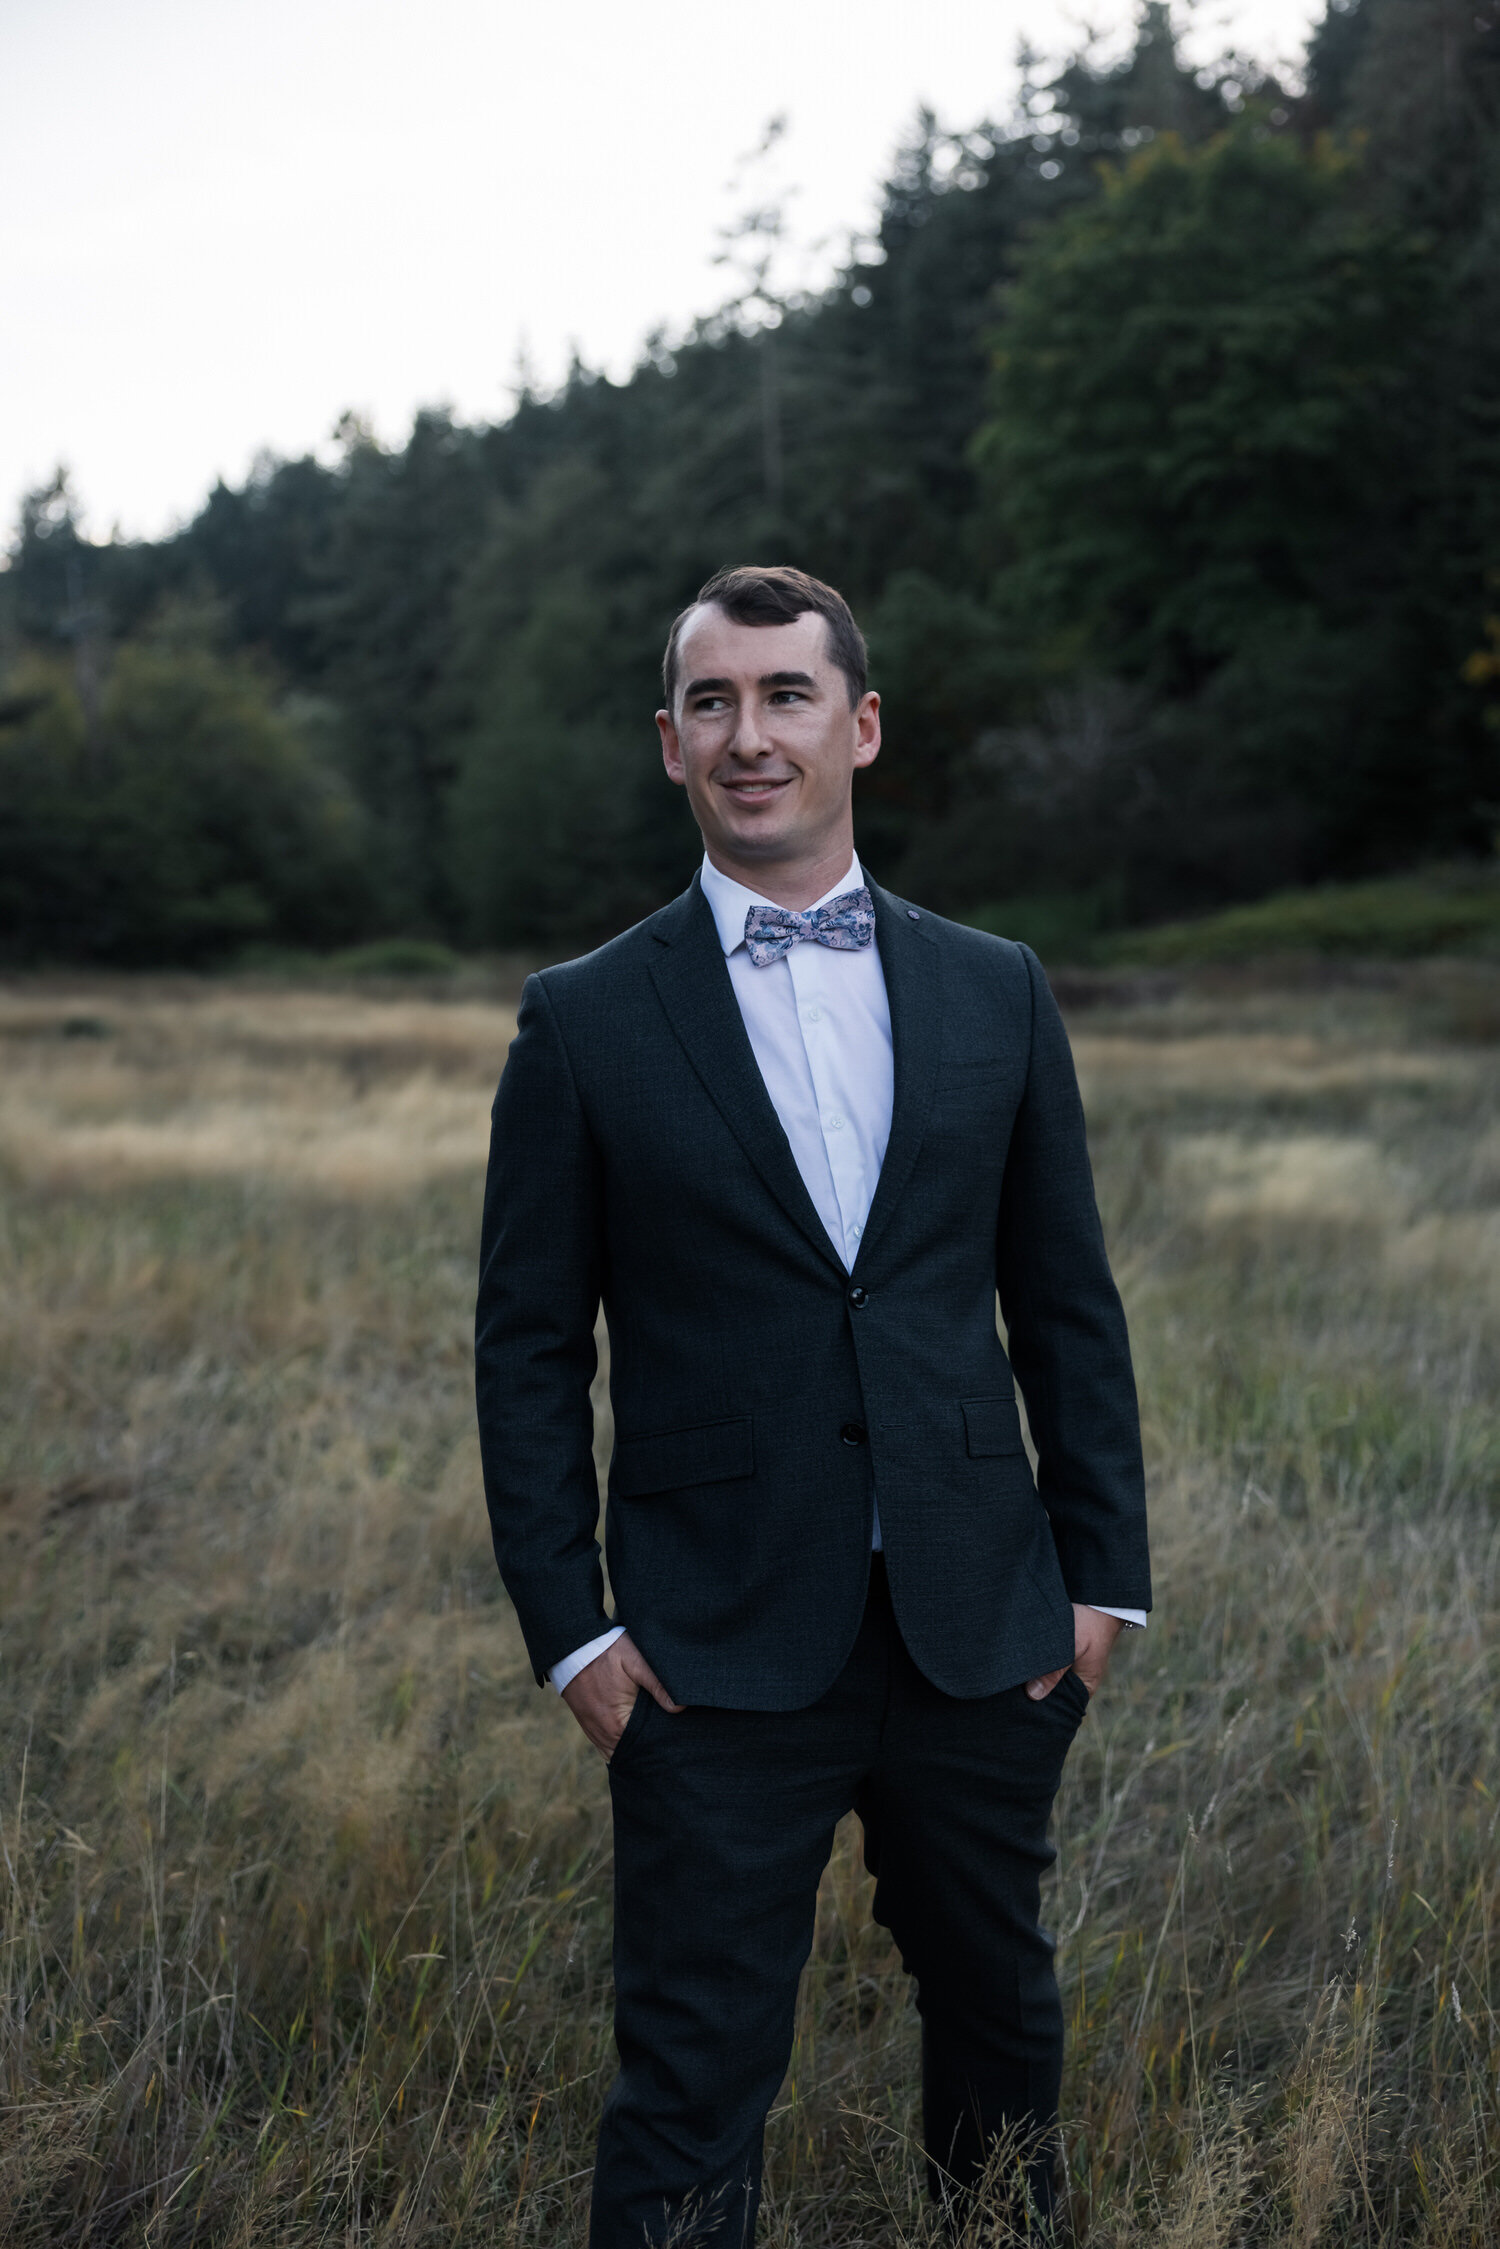 Vancouver Island Adventure Elopement and Small Wedding Photographer - Allie Knull's Photography-88.jpg